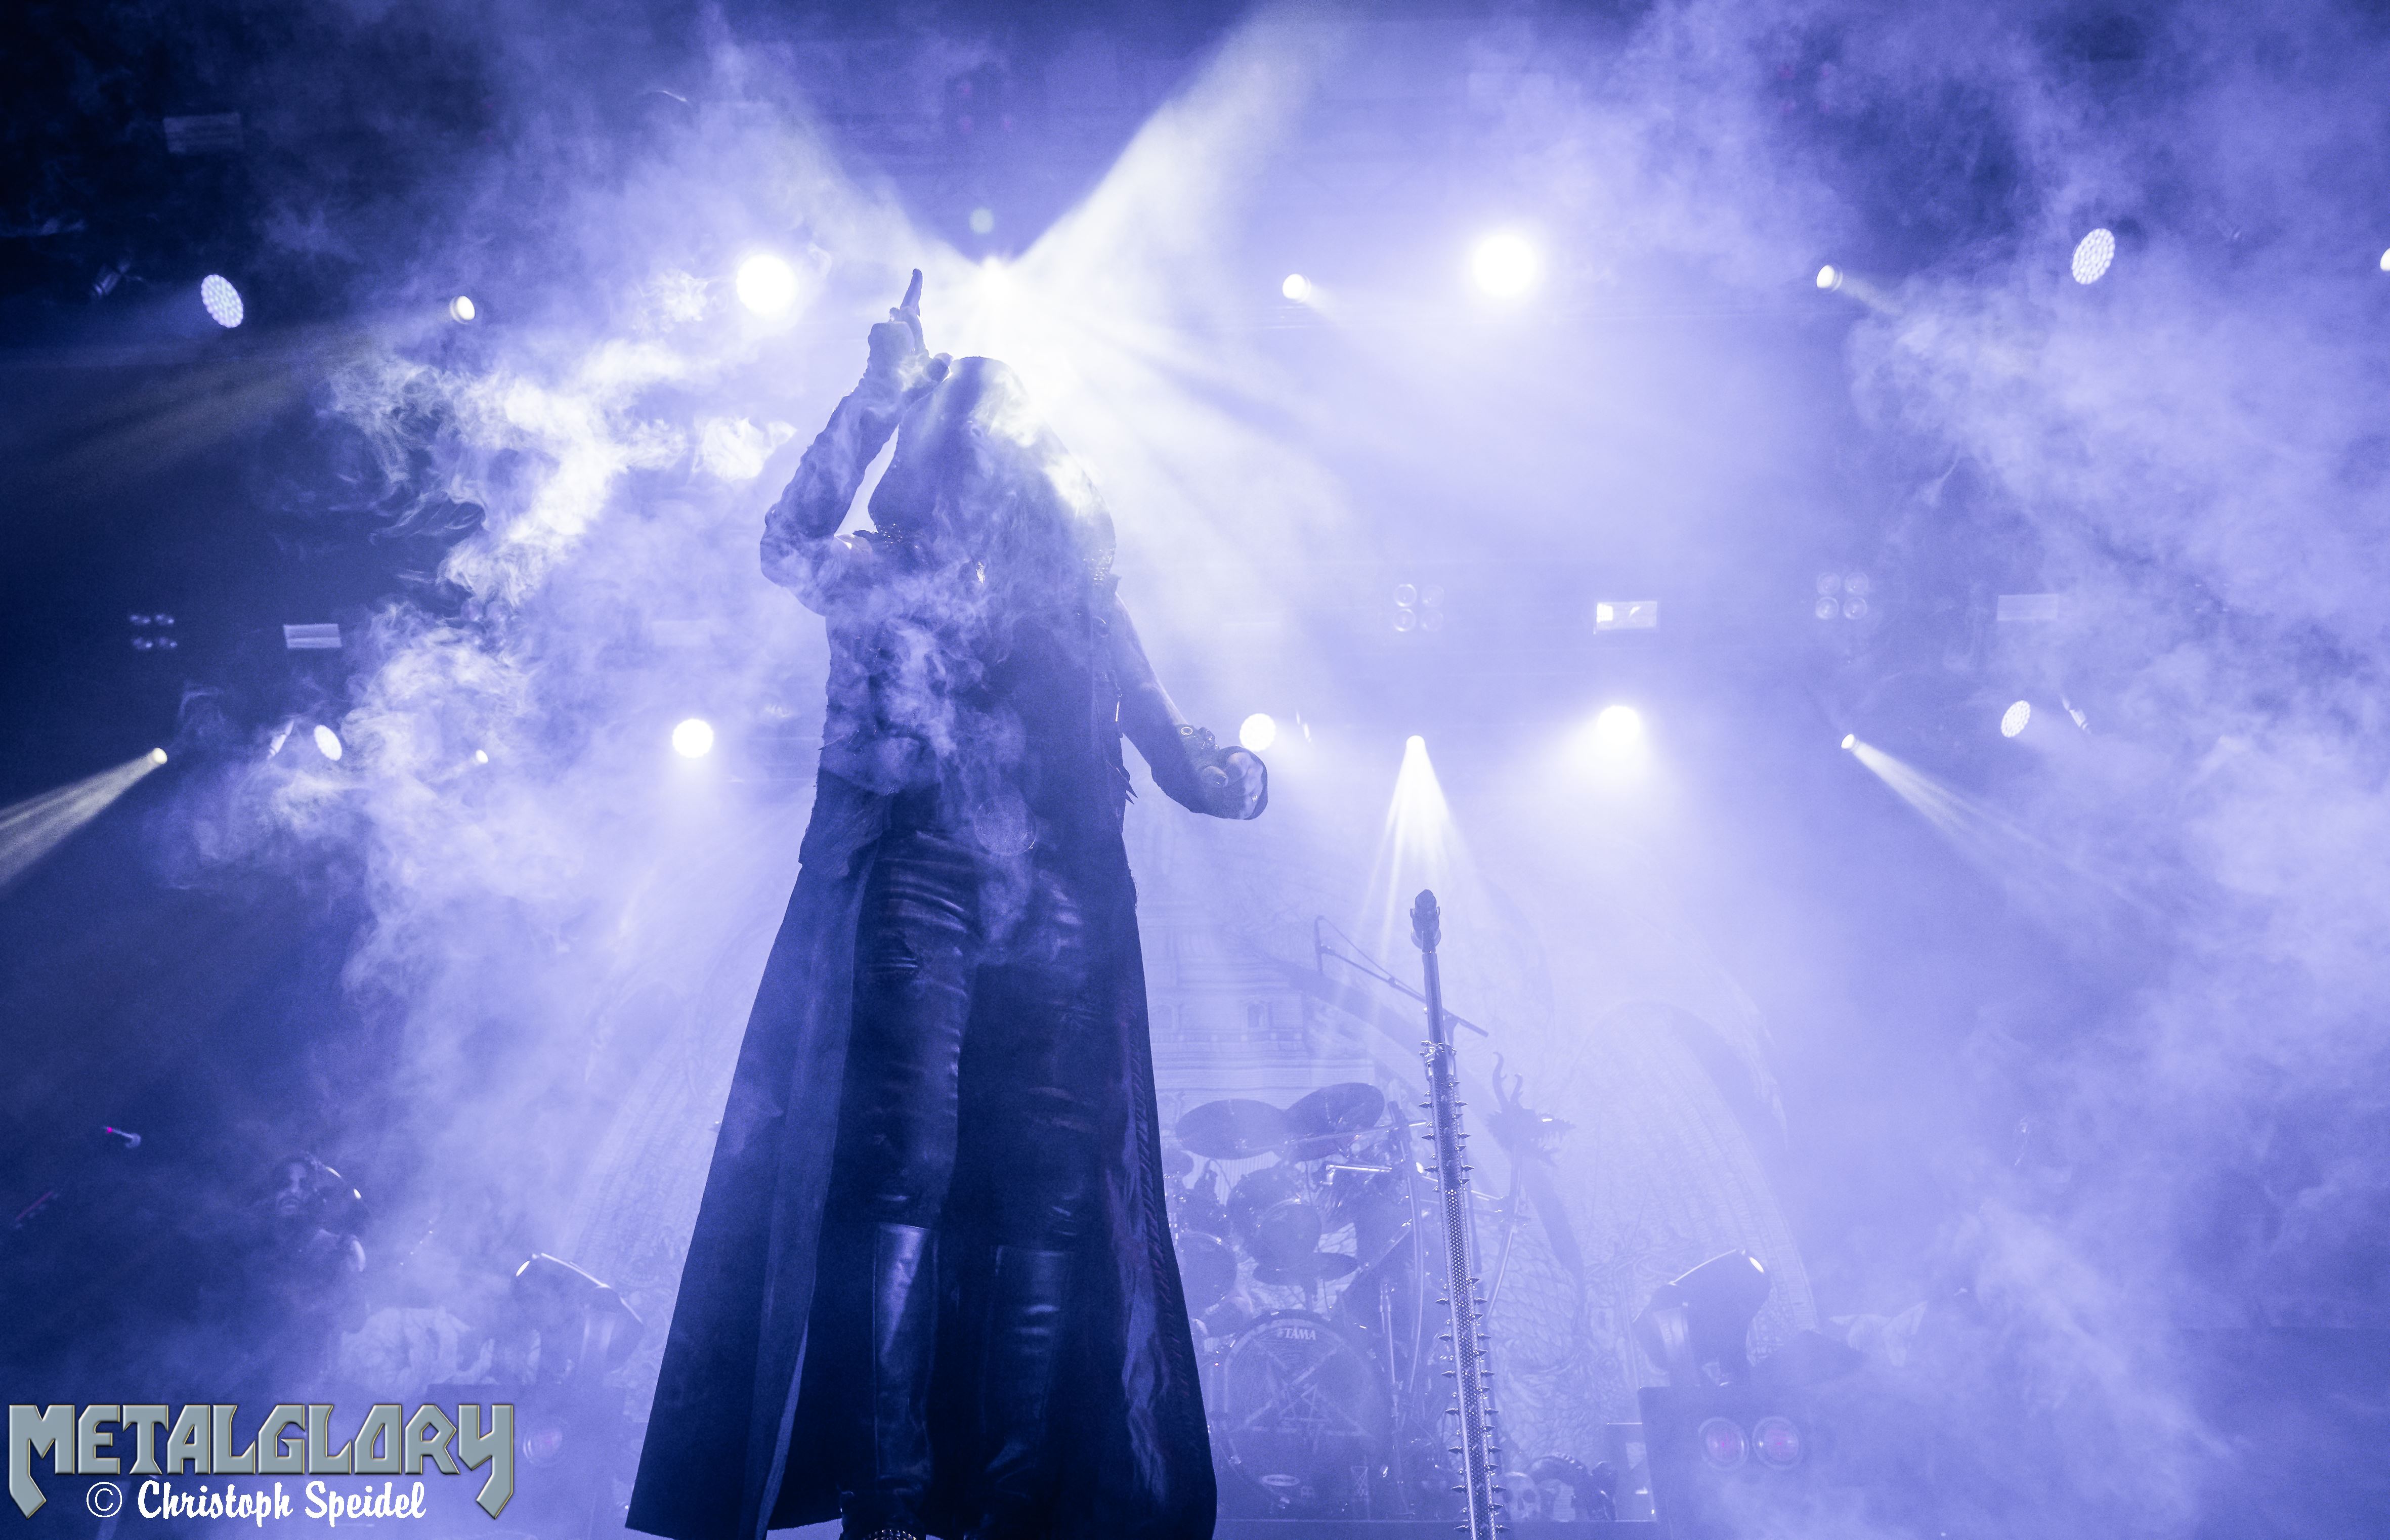 Dimmu Borgir & Amorphis „European Tour 2020“, Support: Wolves in the Throne Room, 01.02.2020, Swiss Life Hall, Hannover